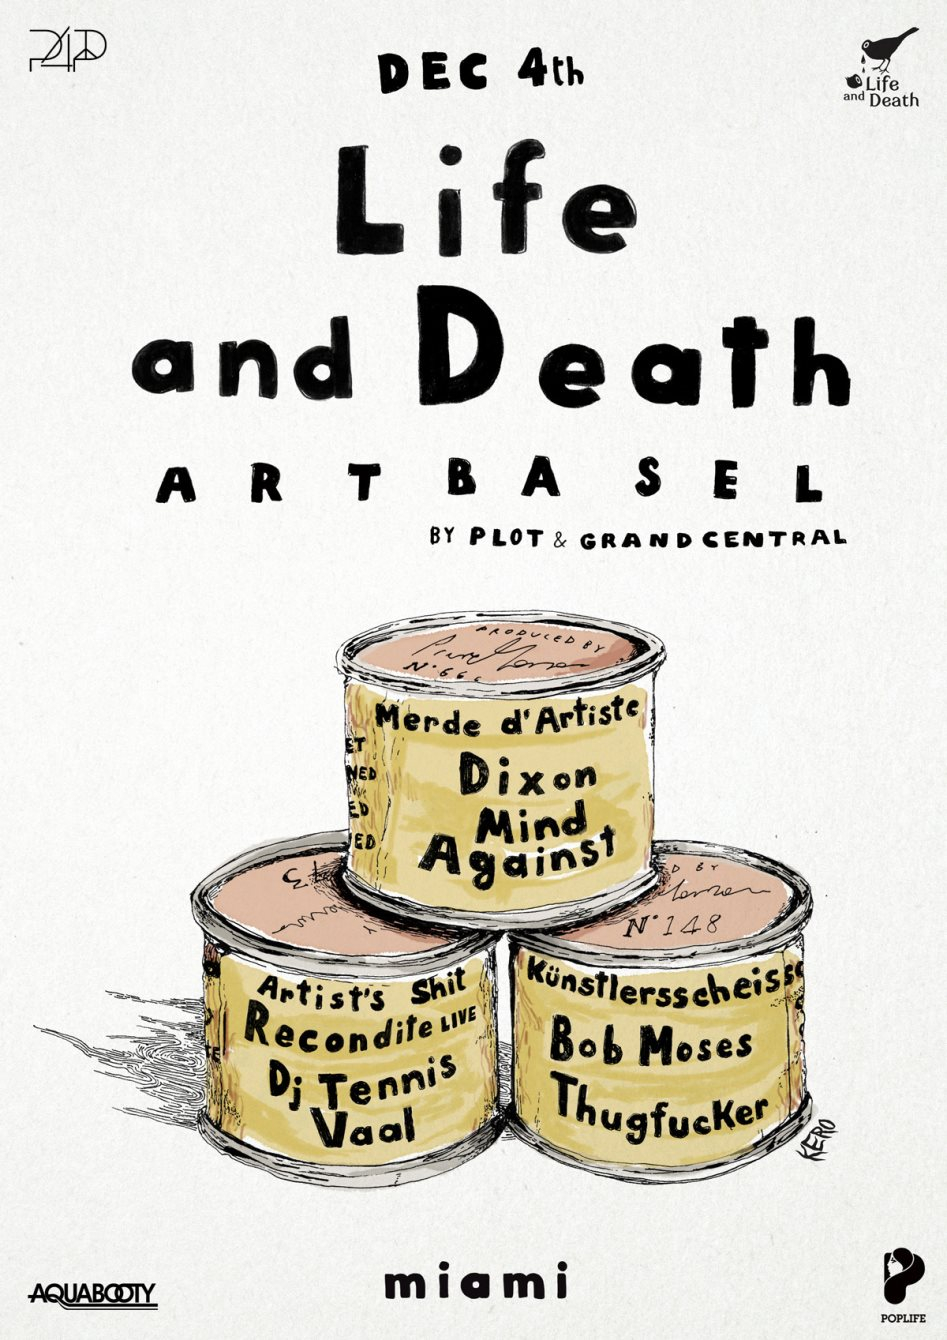 Life and Death - Art Basel by P L 0 T & Grand Central - Flyer front